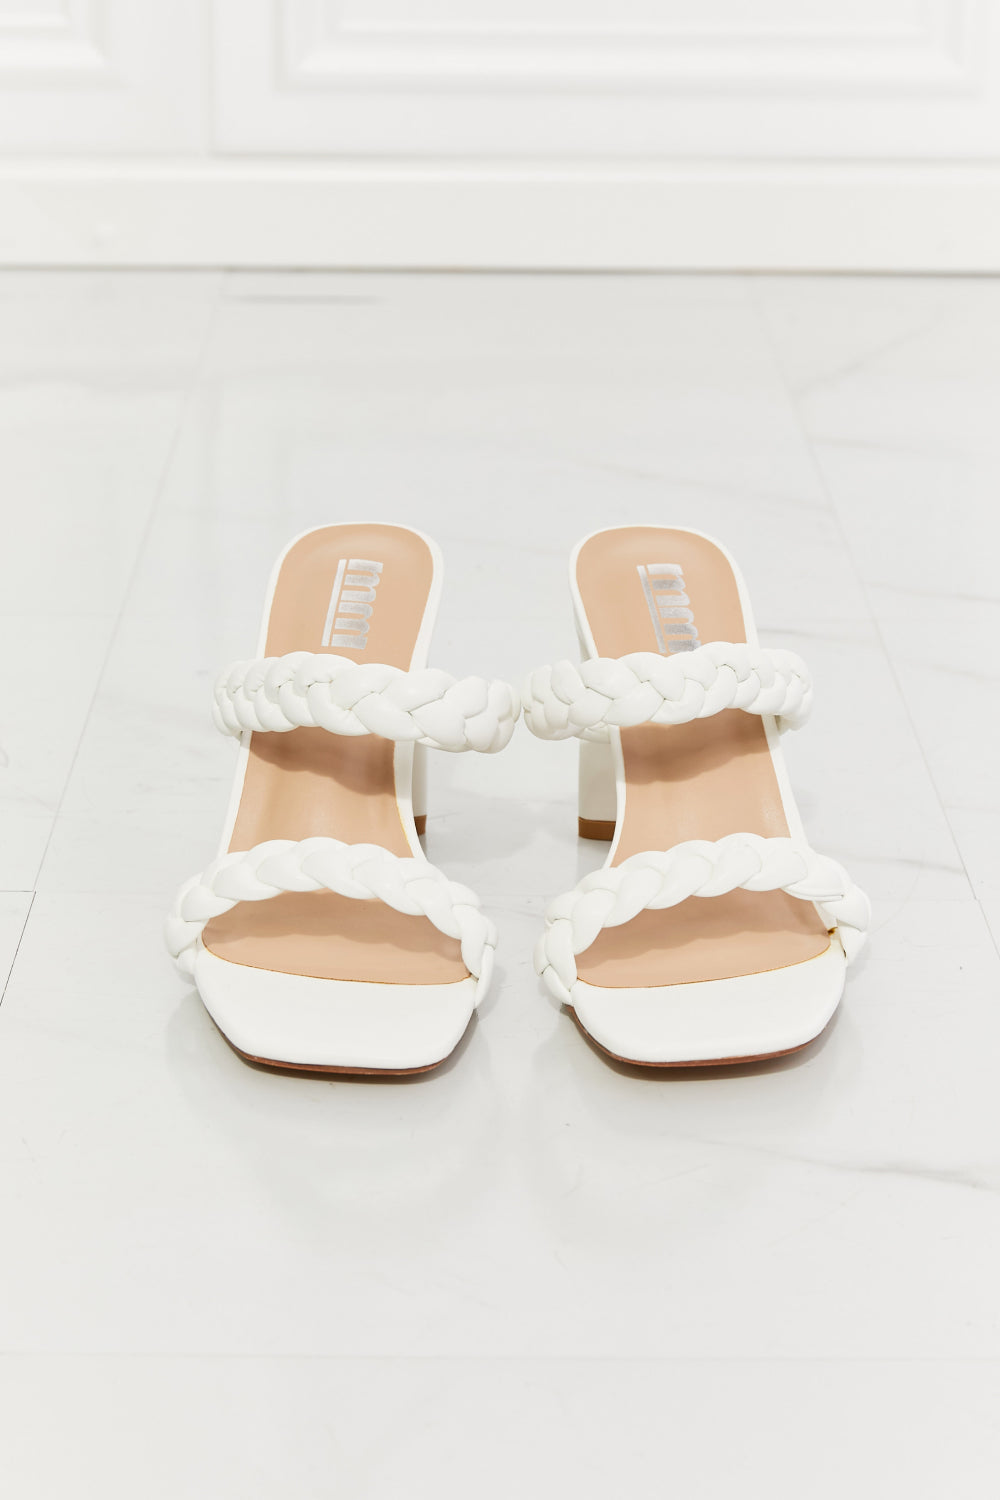 MMShoes In Love Double Braided White Block Heel Sandals Posh Styles Apparel